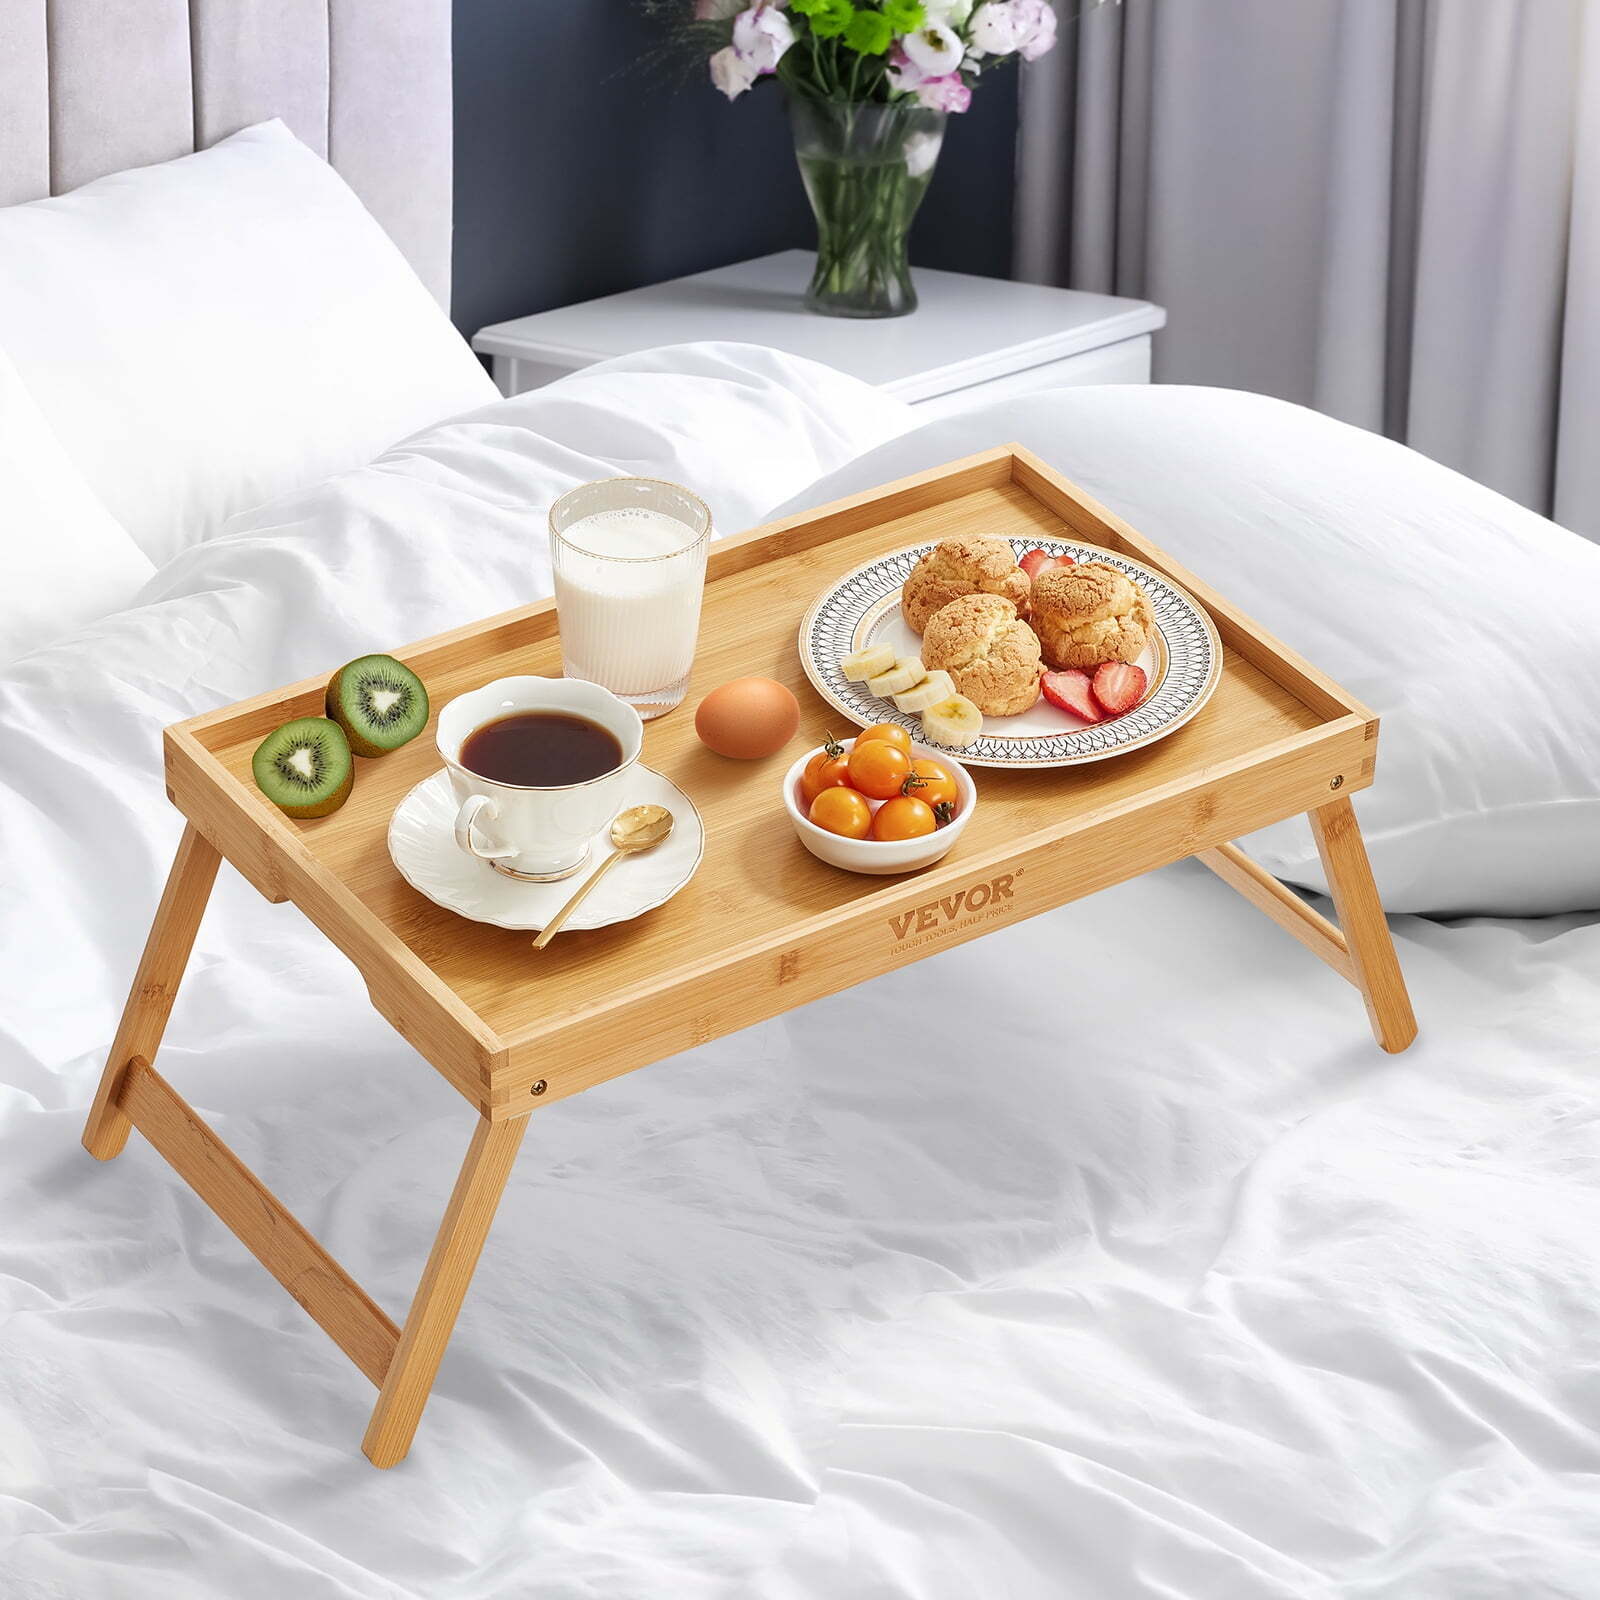 BENTISM Bamboo Bed Tray Foldable Portable Food Snack Tray